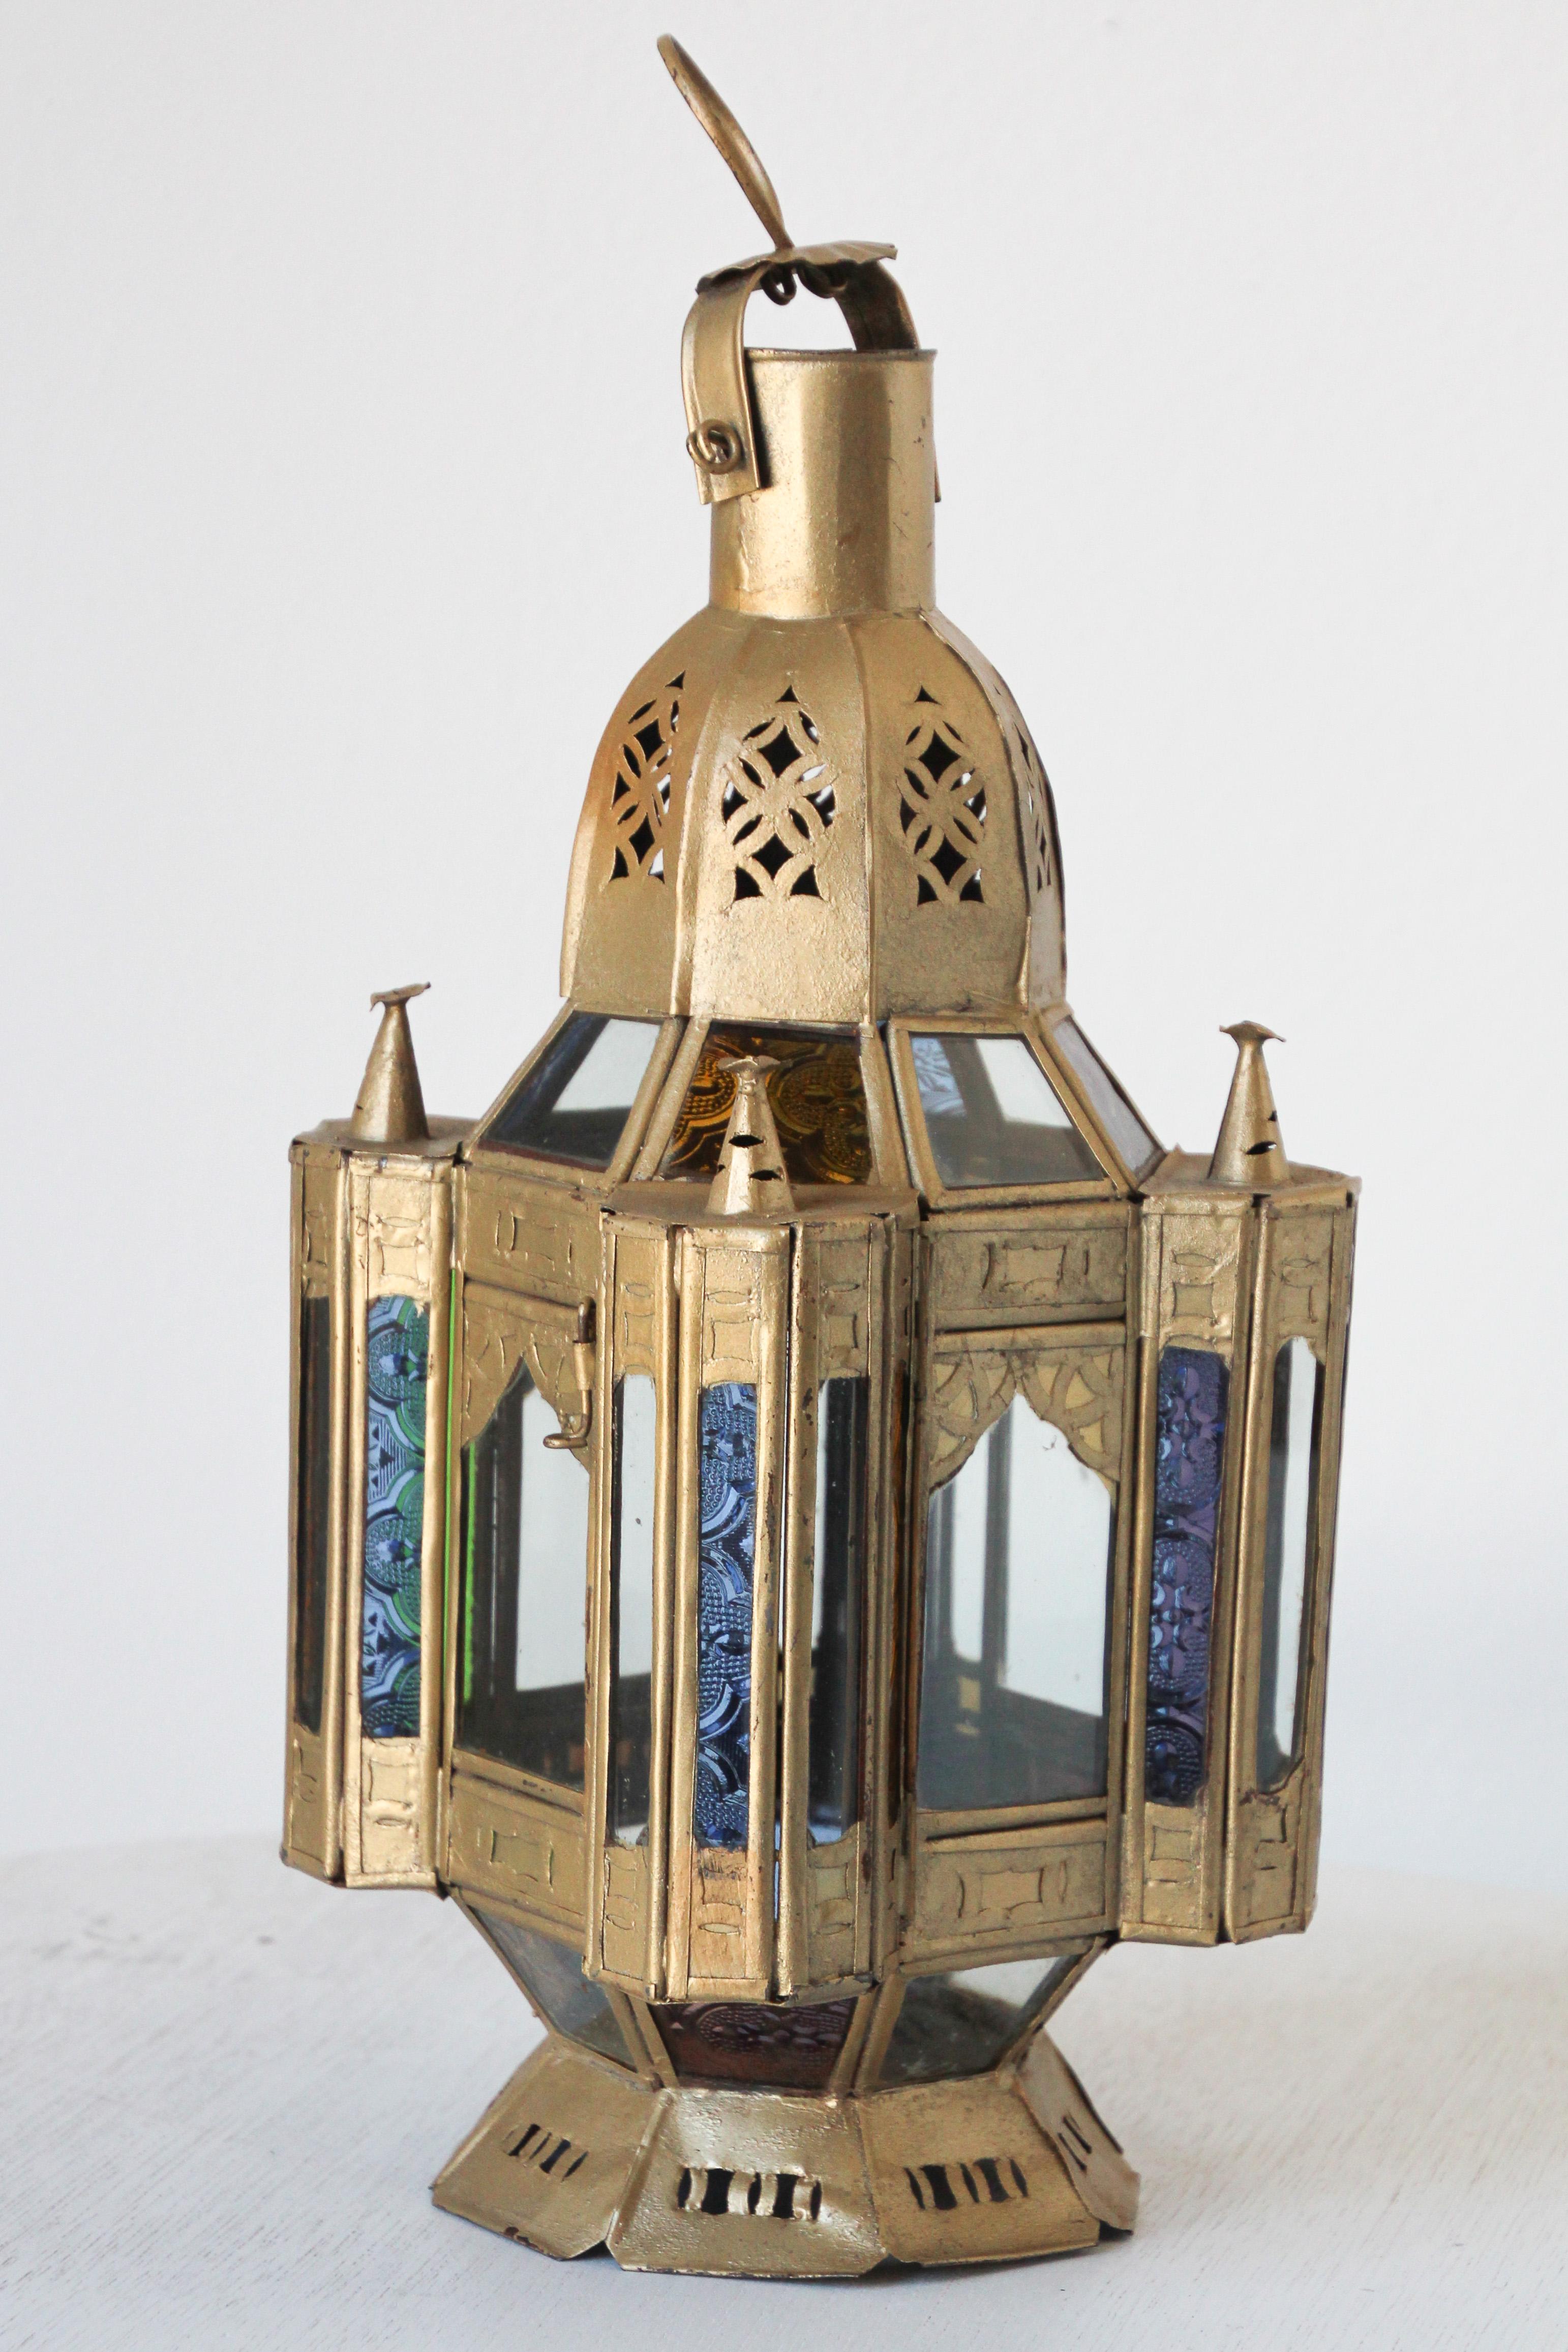 Handcrafted small Moroccan gilt metal glass lantern or Moorish pendant.
Multi-color molded glass in green, lavender, blue and clear.
Hurricane candle lamp handmade in Marrakech, vintage metal in gold color finish.
Nice Moorish lantern to use around